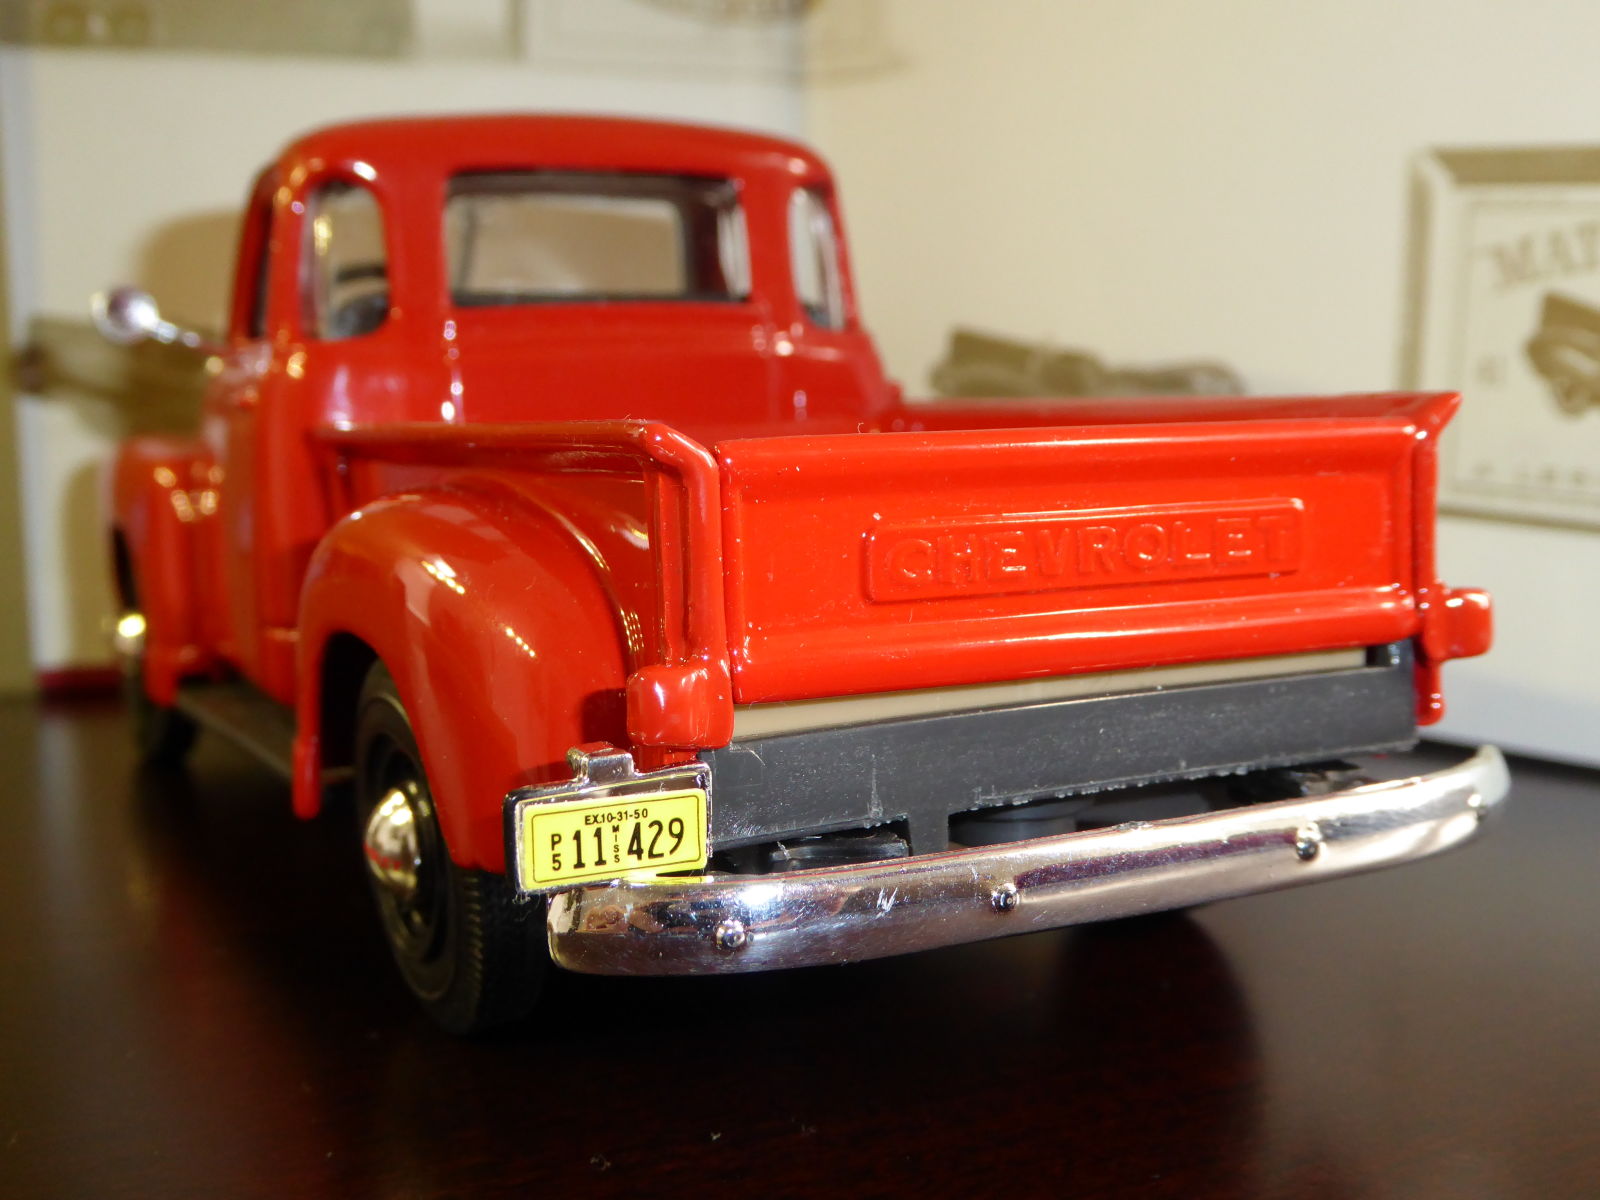 The license plate holder is molded with the bumper. Rear lights are molded with the body and painted with the same color.